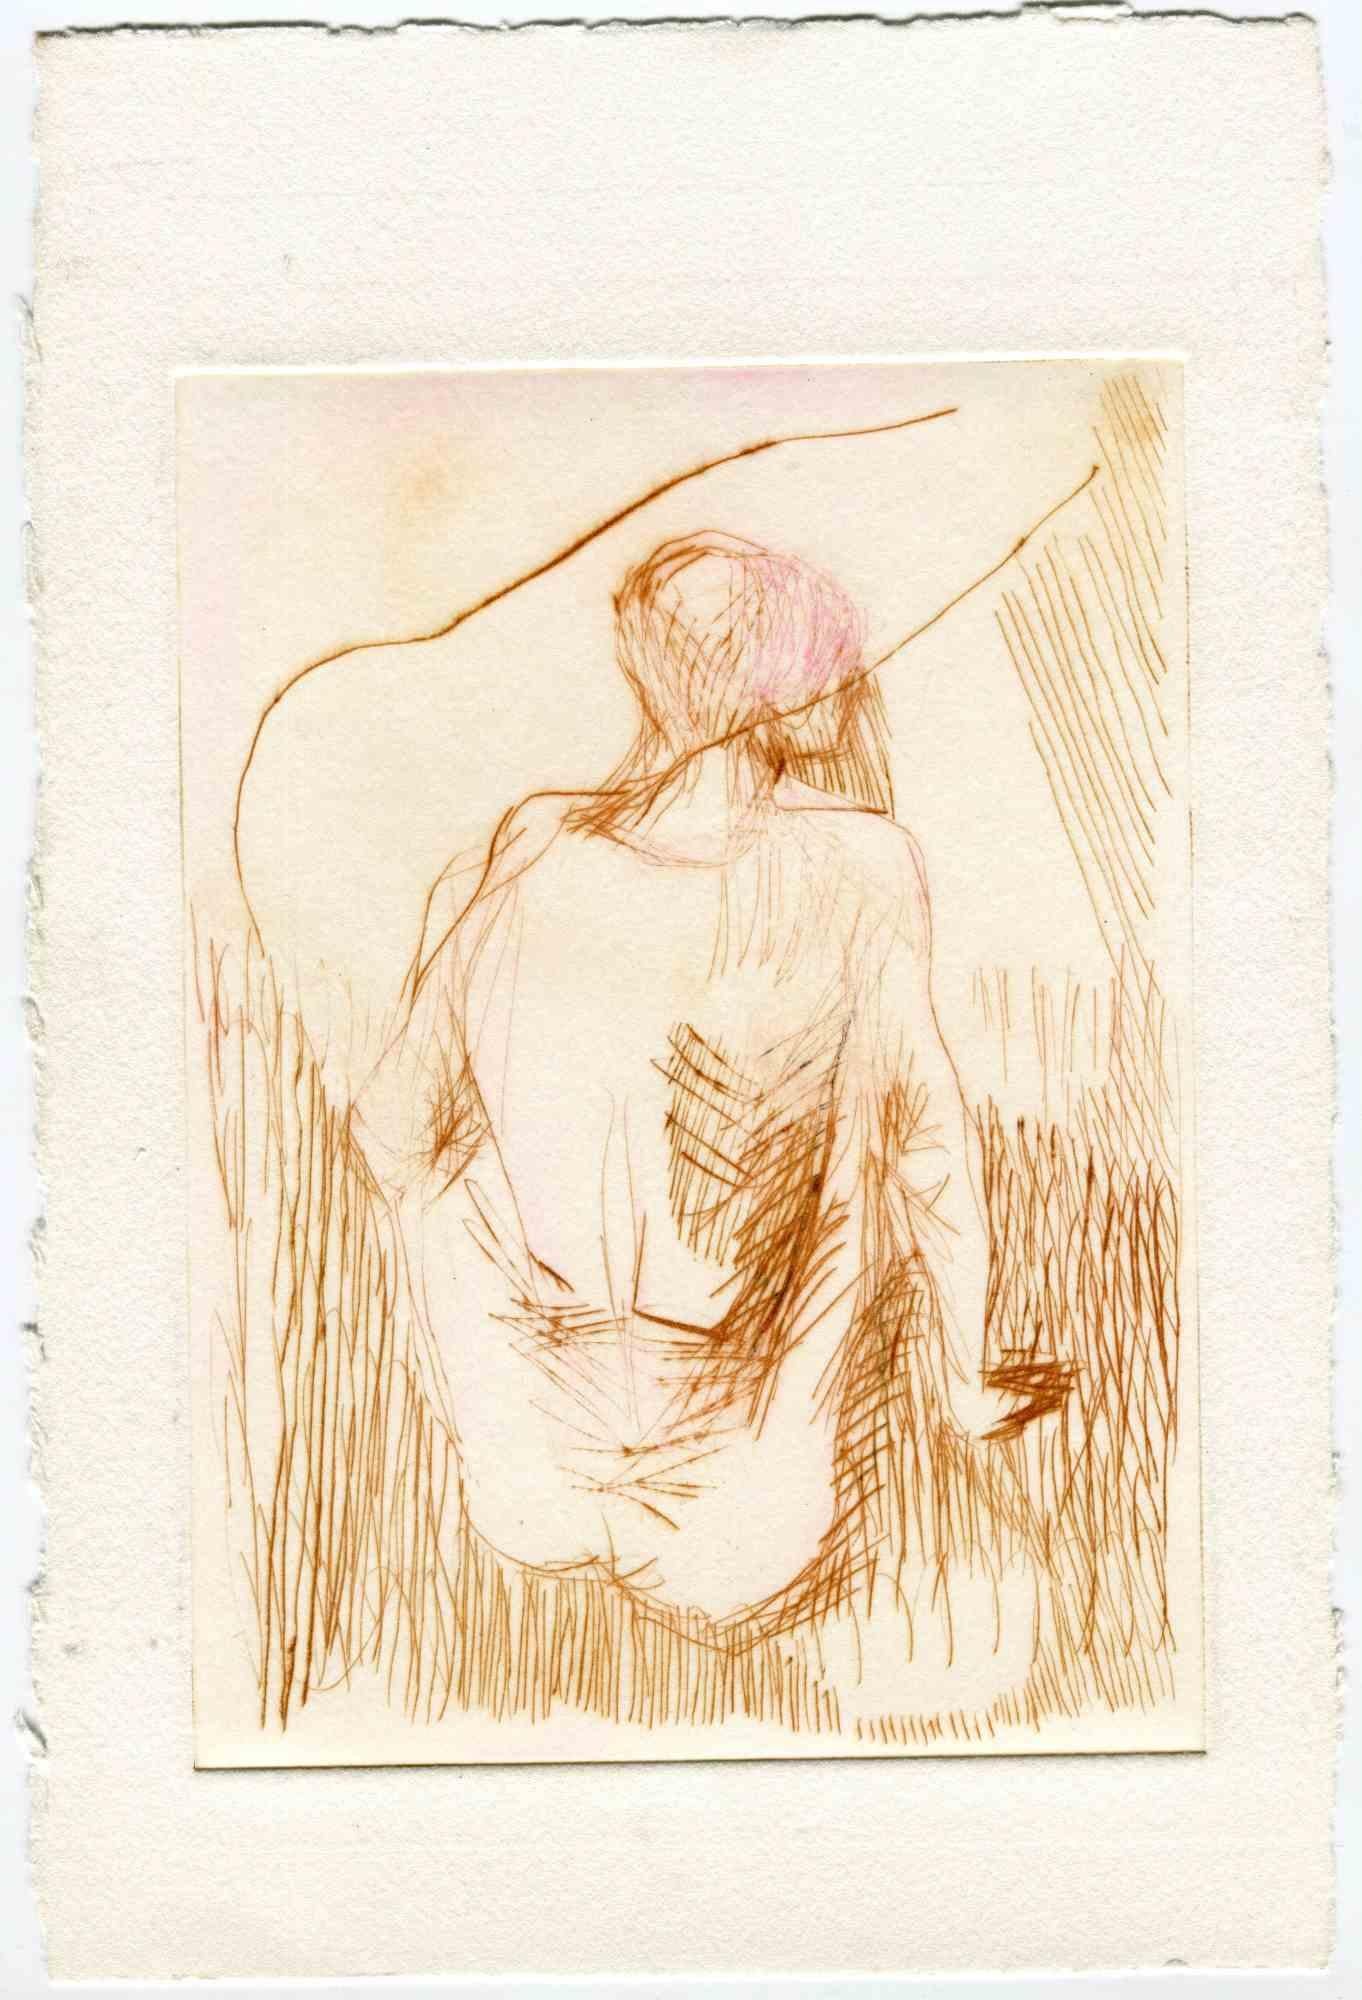 Unknown Figurative Print - Nude - Original Etching and Drypoint - Mid-20th Century